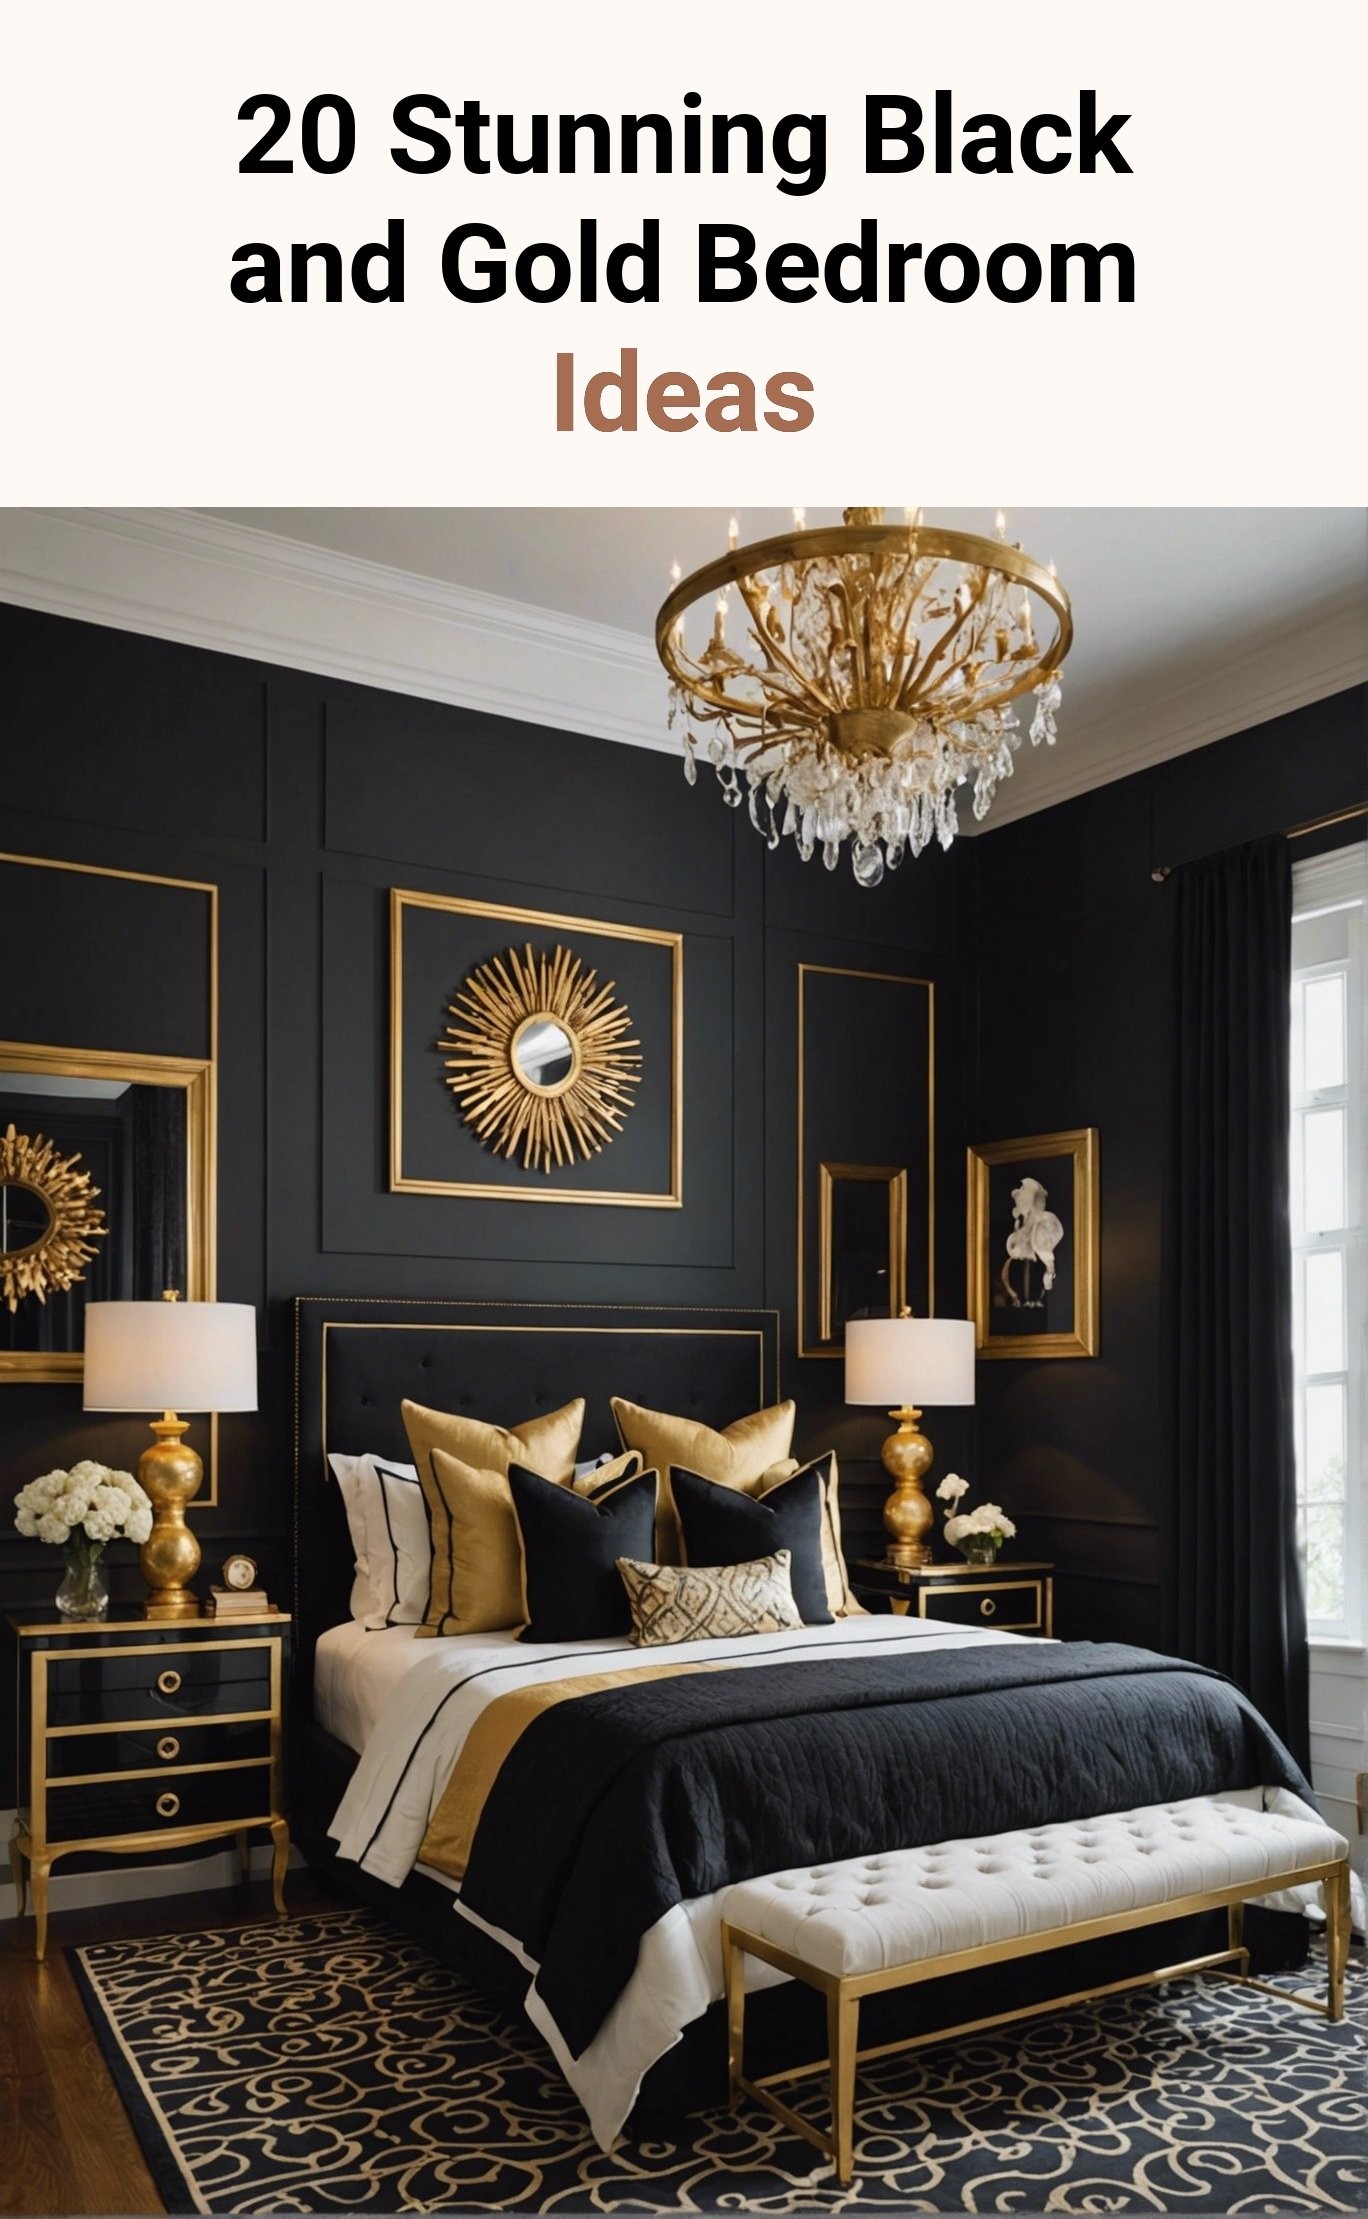 20 Stunning Black and Gold Bedroom Ideas